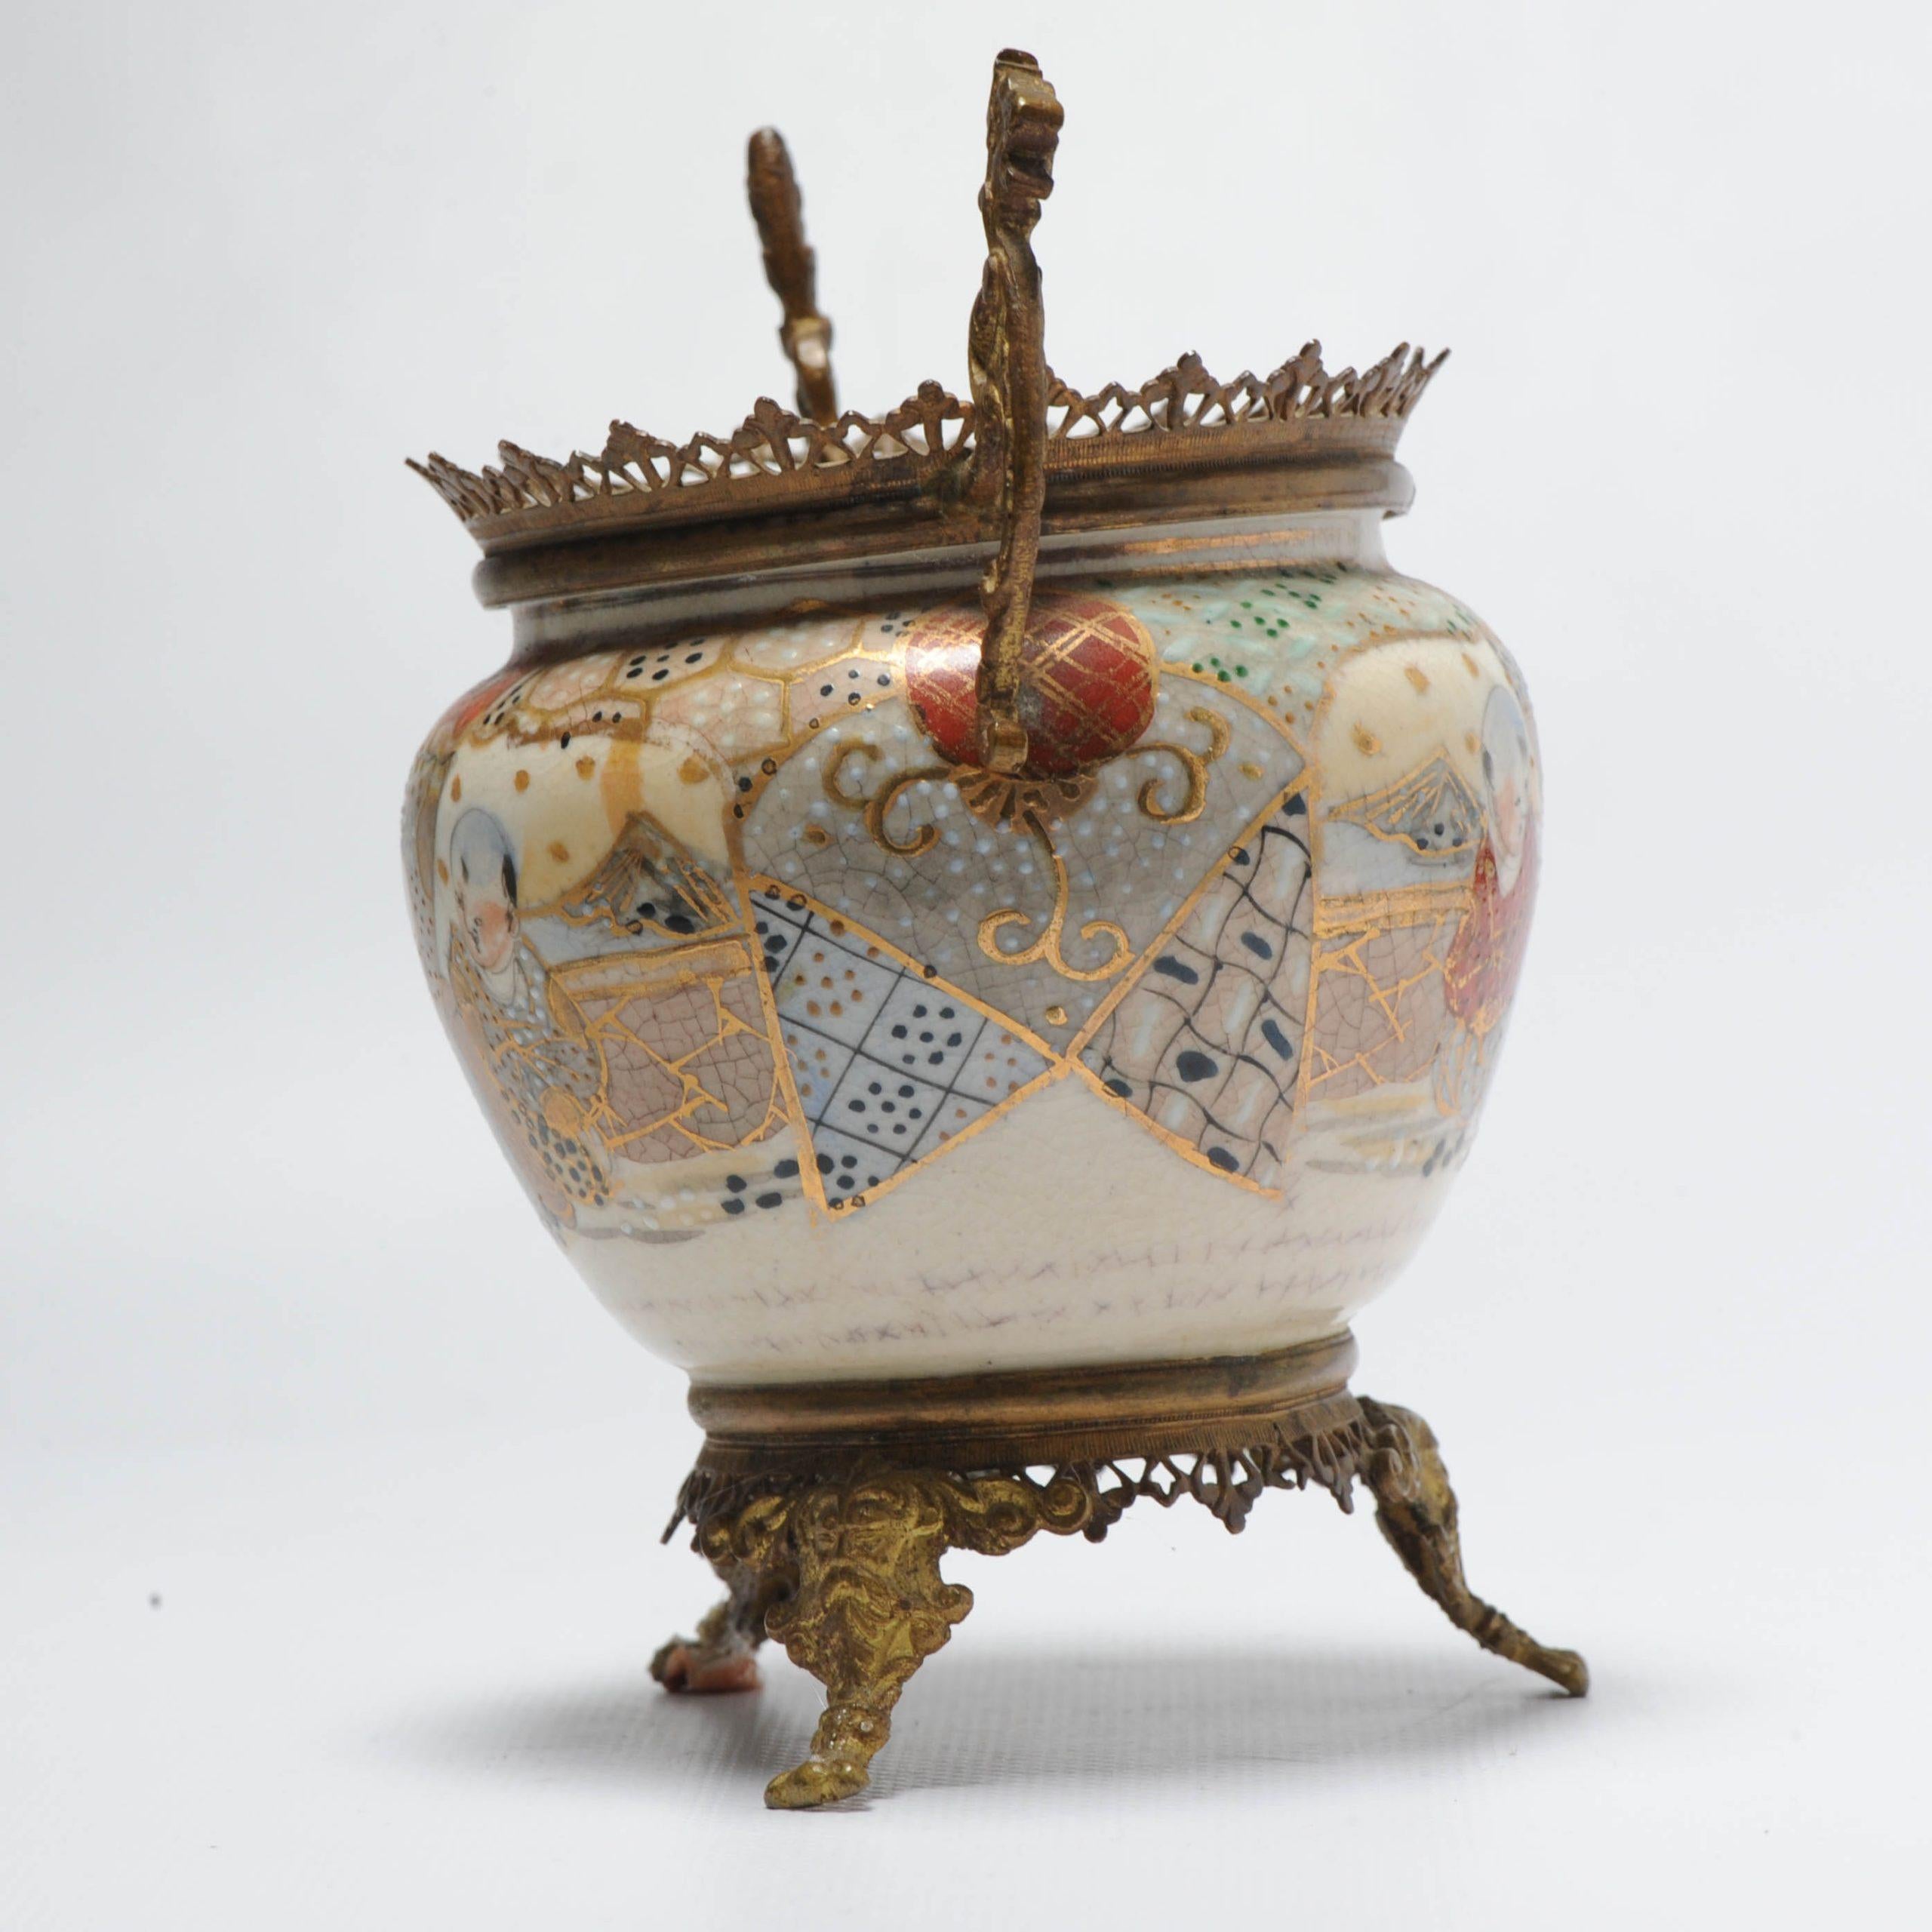 A nice Example Satsuma Mounted or Oromulu-mounted.

1. What exactly are ‘mounted porcelains’?
The term ‘mounted porcelains’ refers to pieces of porcelain — originally produced in China, Japan or Europe — which are further embellished with